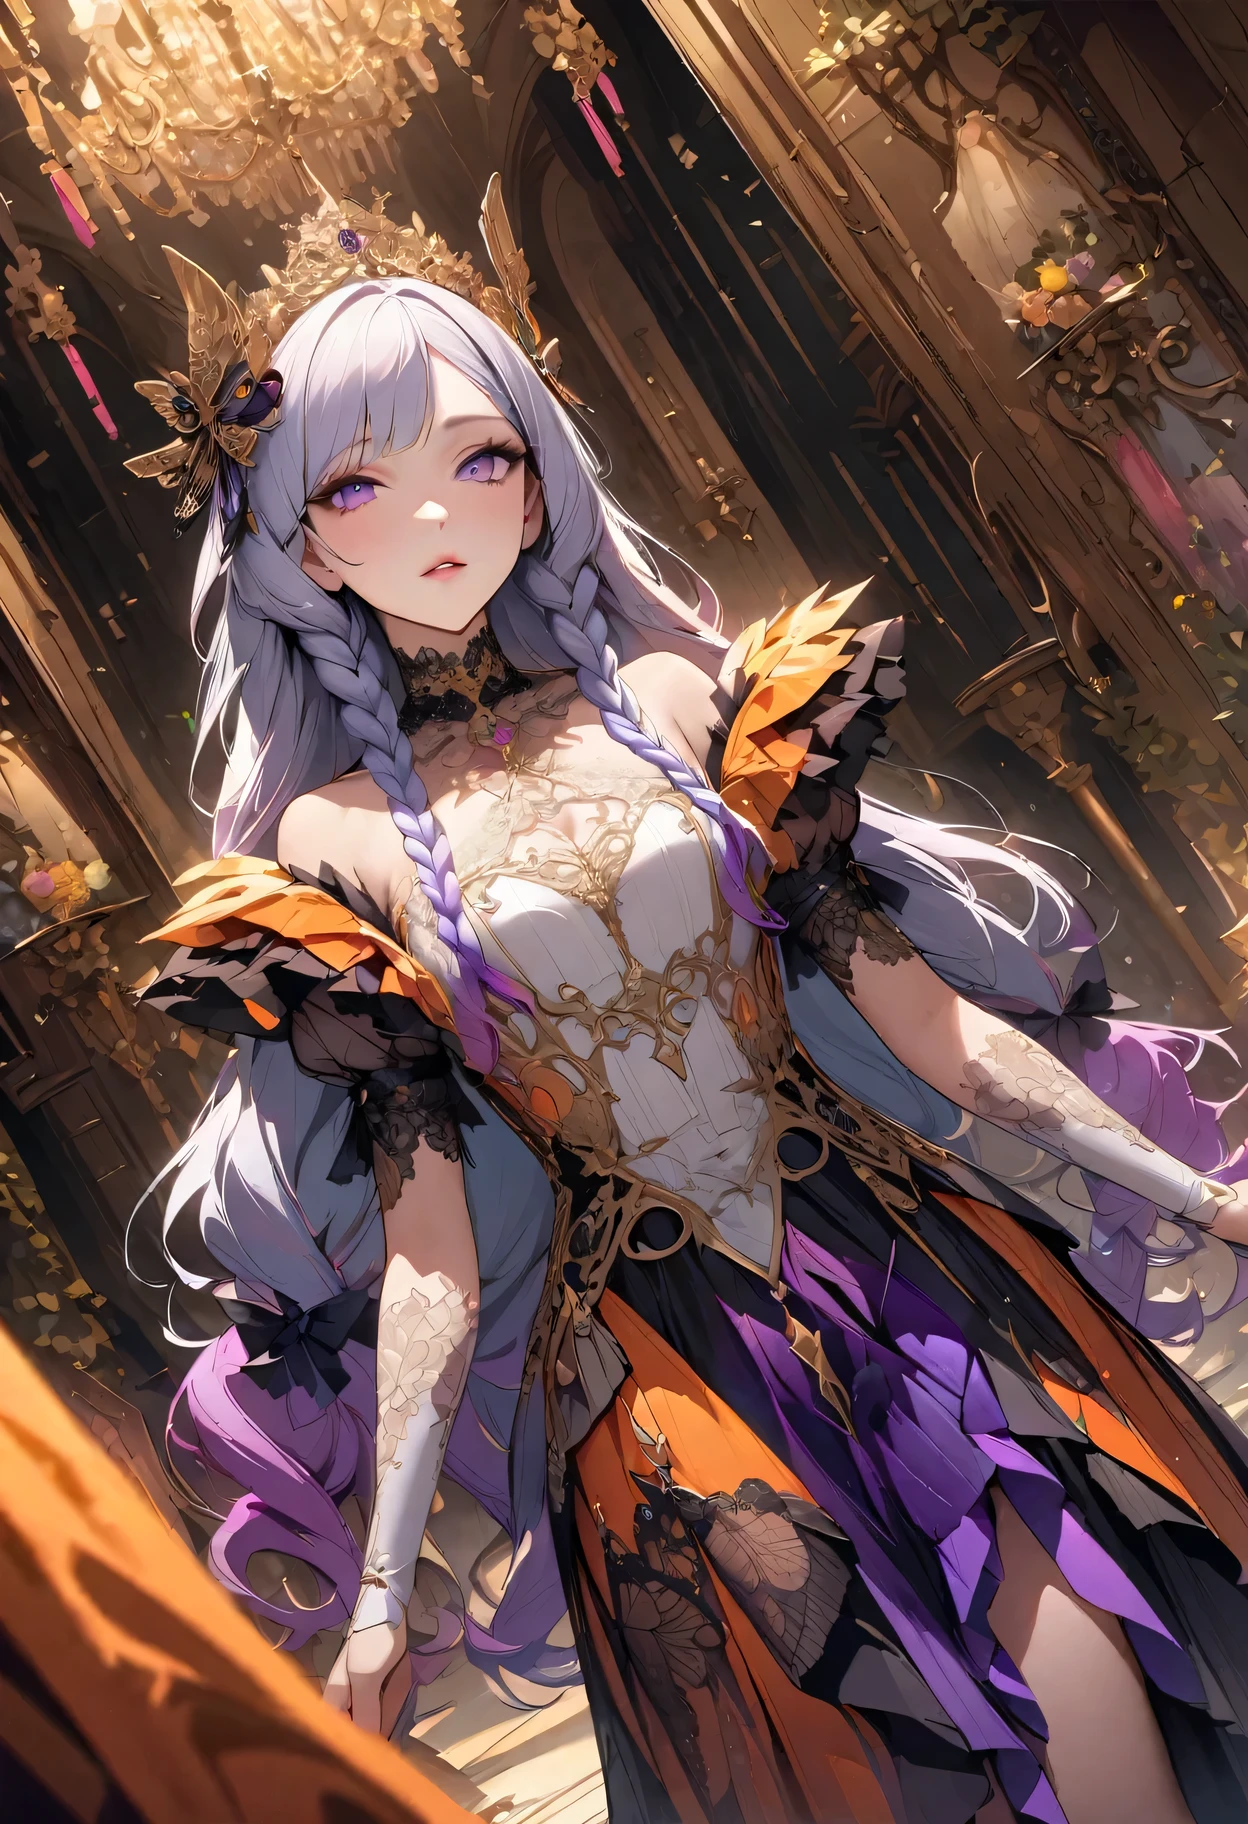 (masterpiece)、(Top quality)、(Highly detailed CG illustrations）、Official Art、1920s Style、Mrs. Moore、yinji, (purple hair, purple eyes, long hair, white hair, double braids, gradient hair,Cruel beauty、Gorgeous、gorgeous、White lace、Gorgeous dress、Jewelry、Butterfly pattern、Orange undertone、Vibrant colors、Perfect angle、Perfect composition